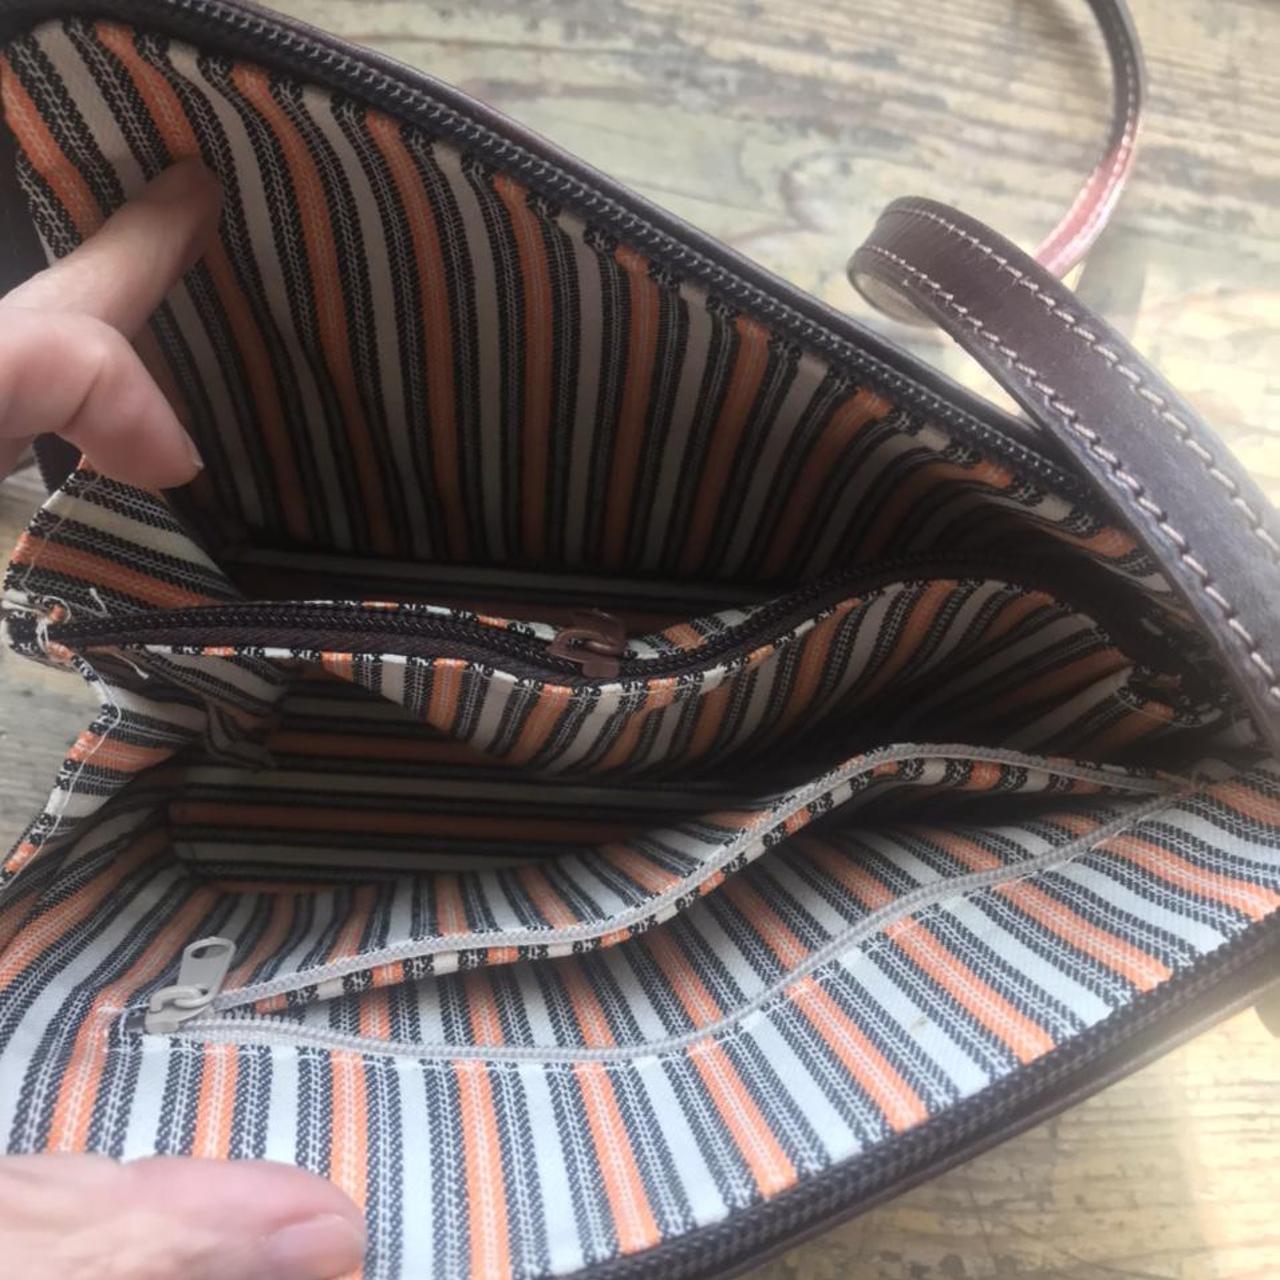 Product Image 3 - I got this bag in